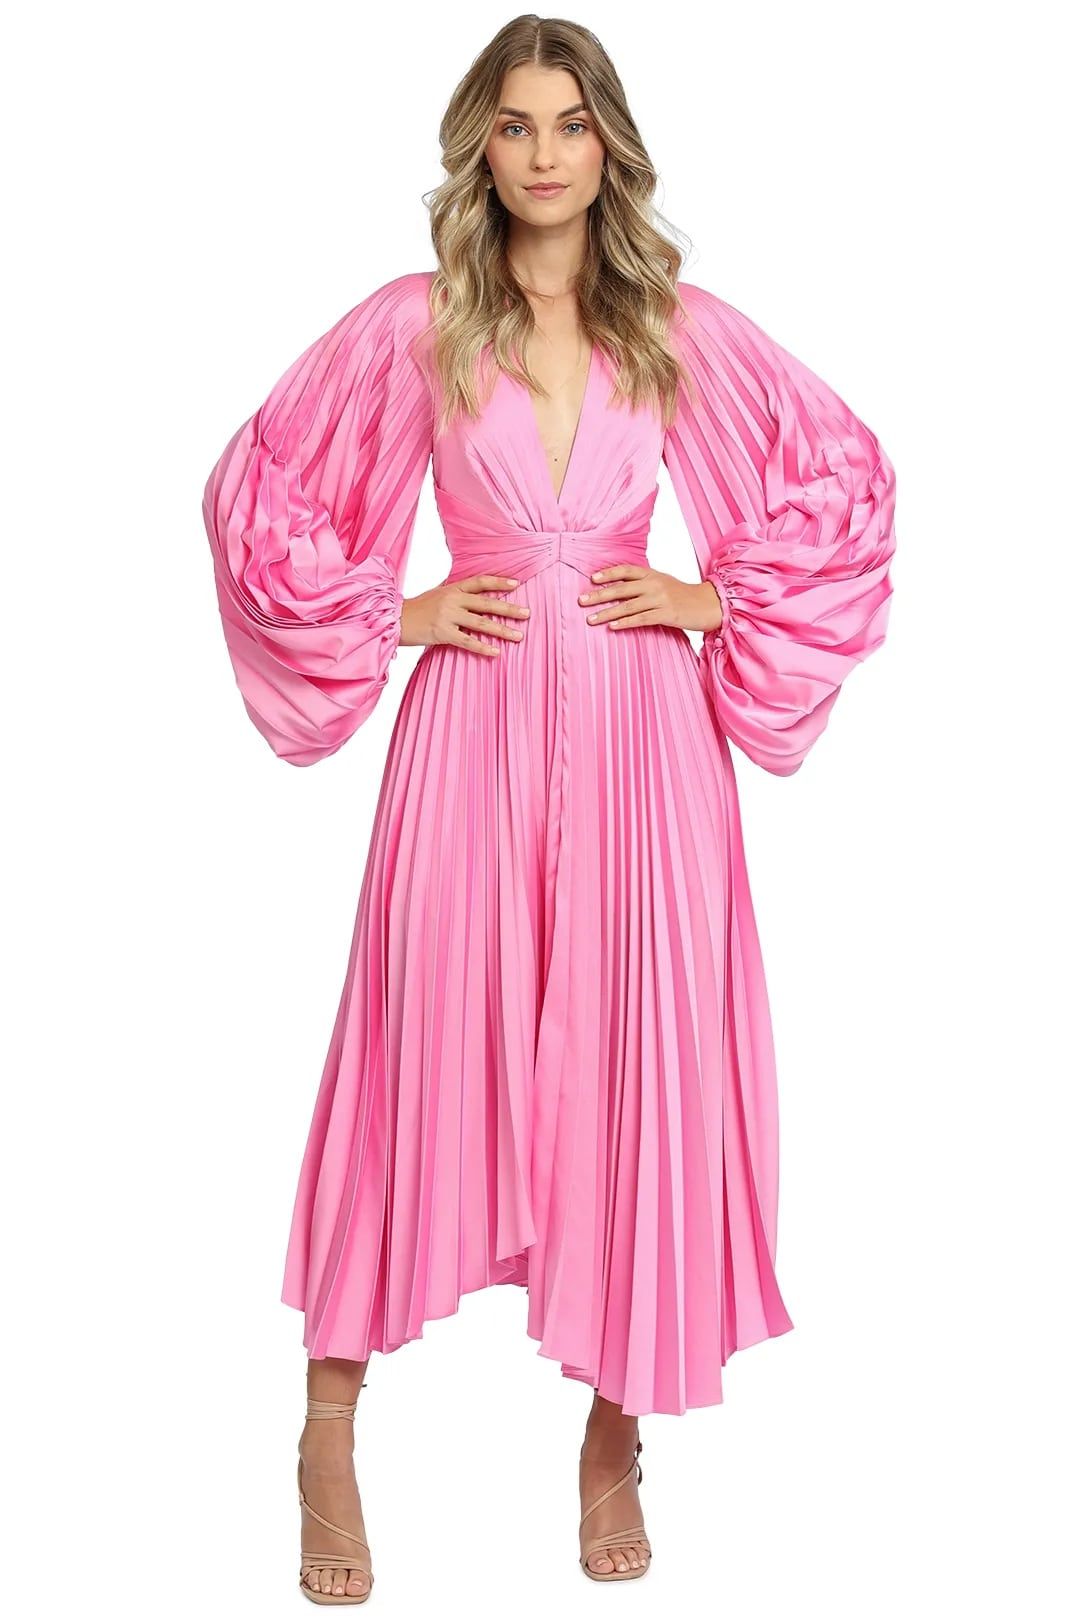 Hire Palms dress in pink for wedding guests.